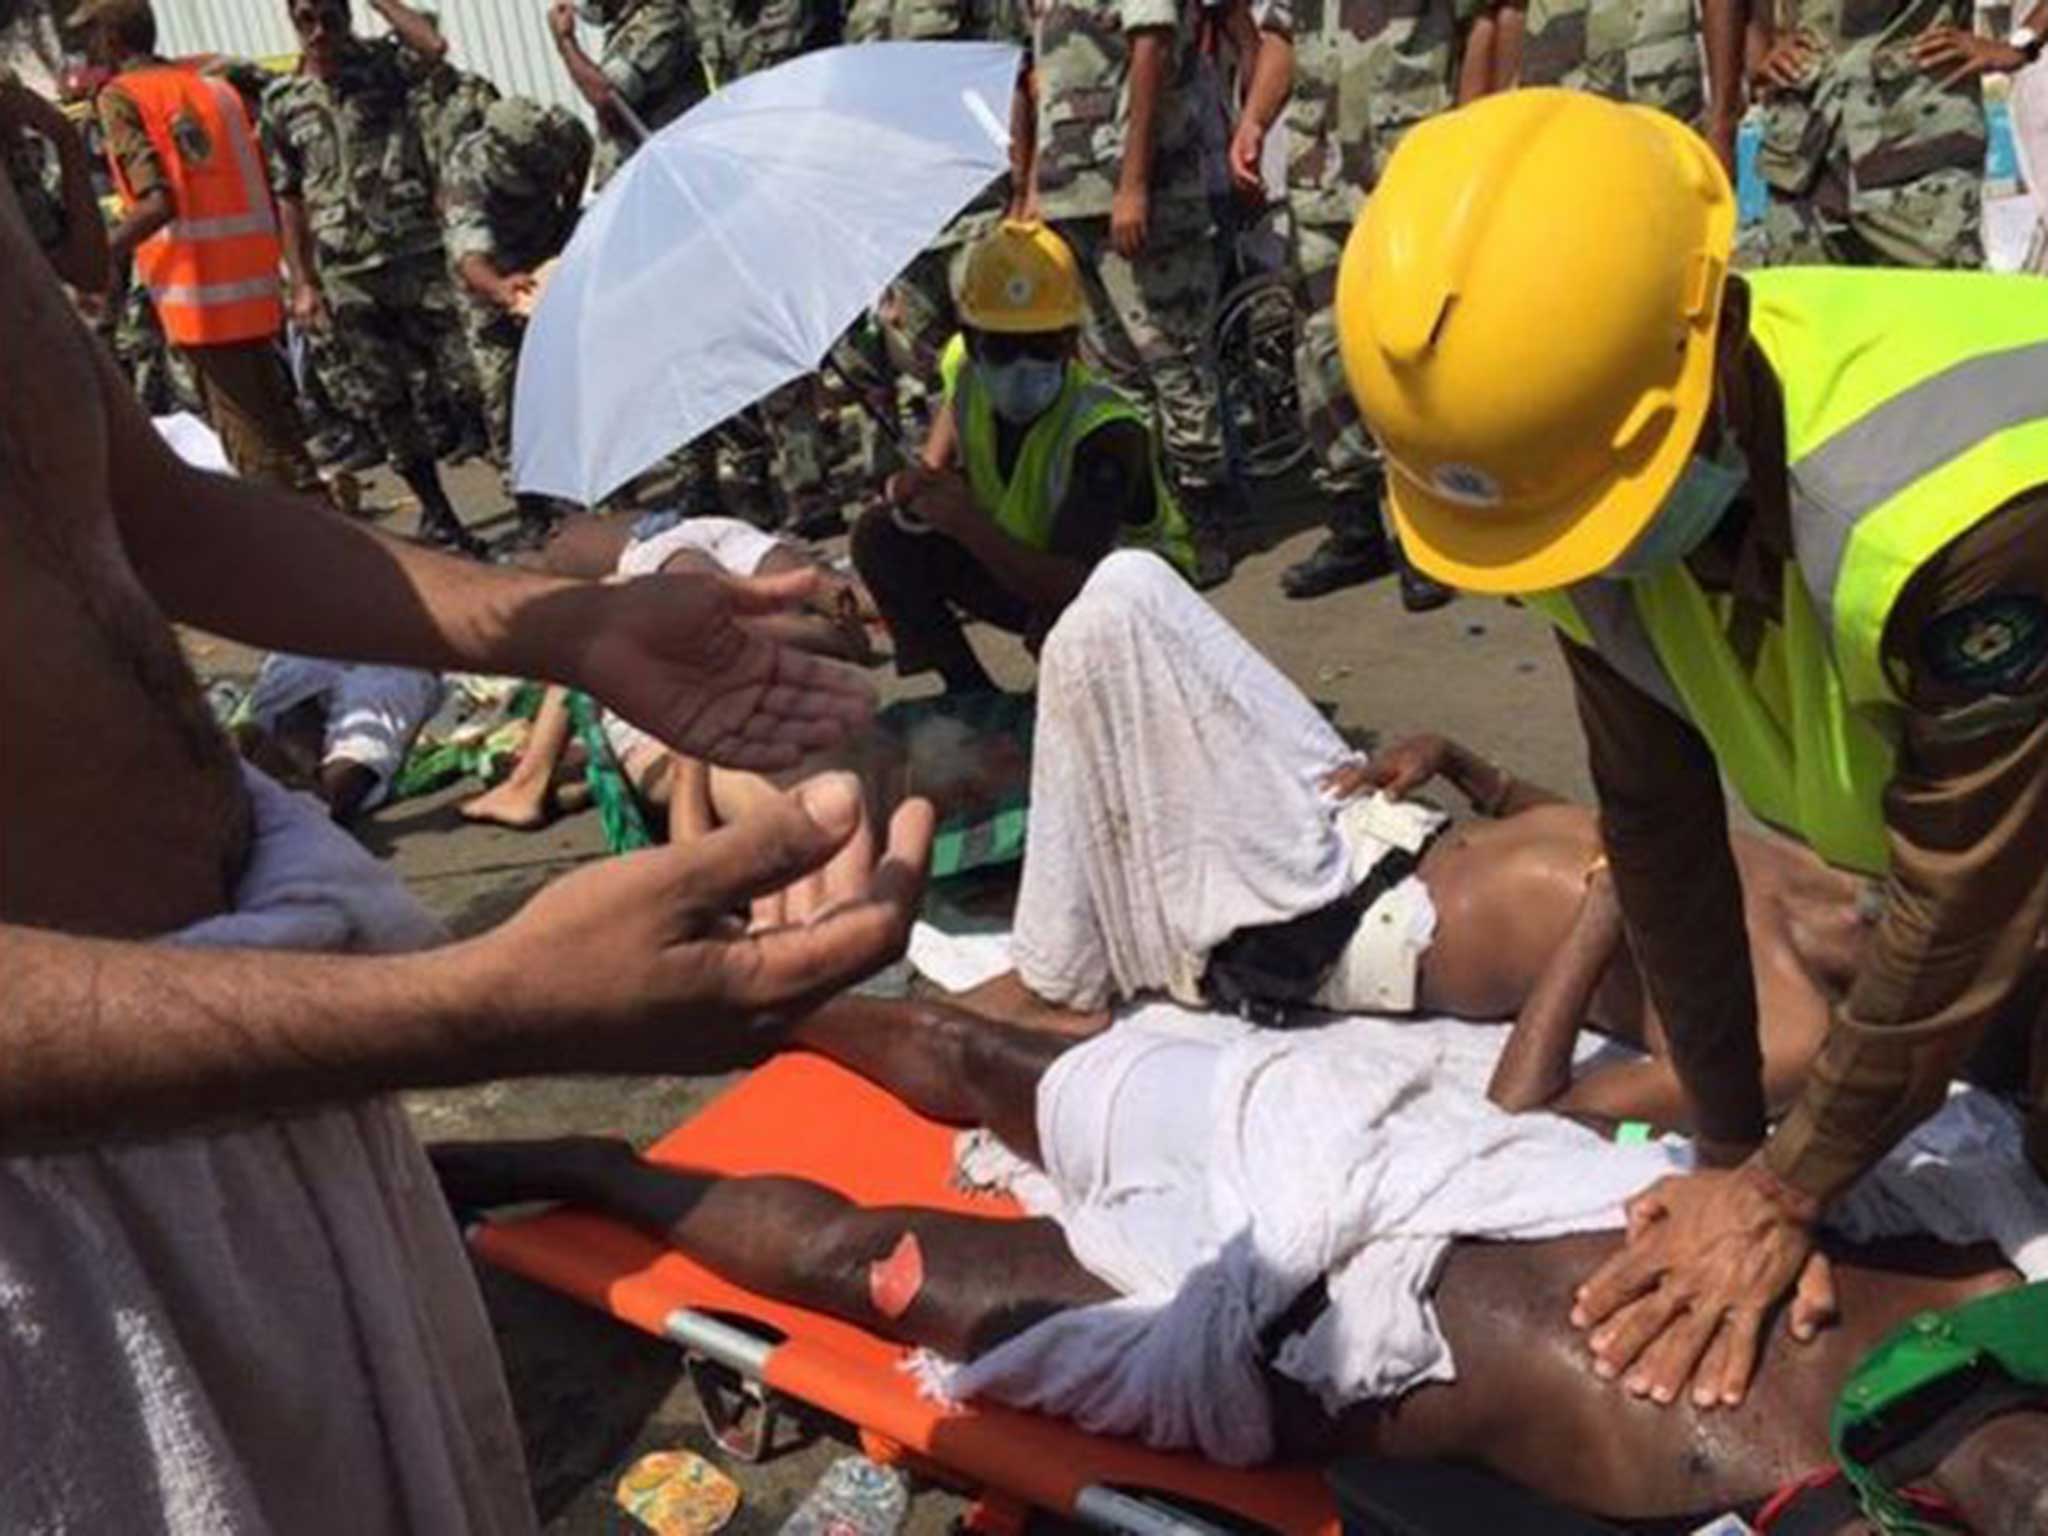 A medic tends to one of the more than 300 people injured in the stampede